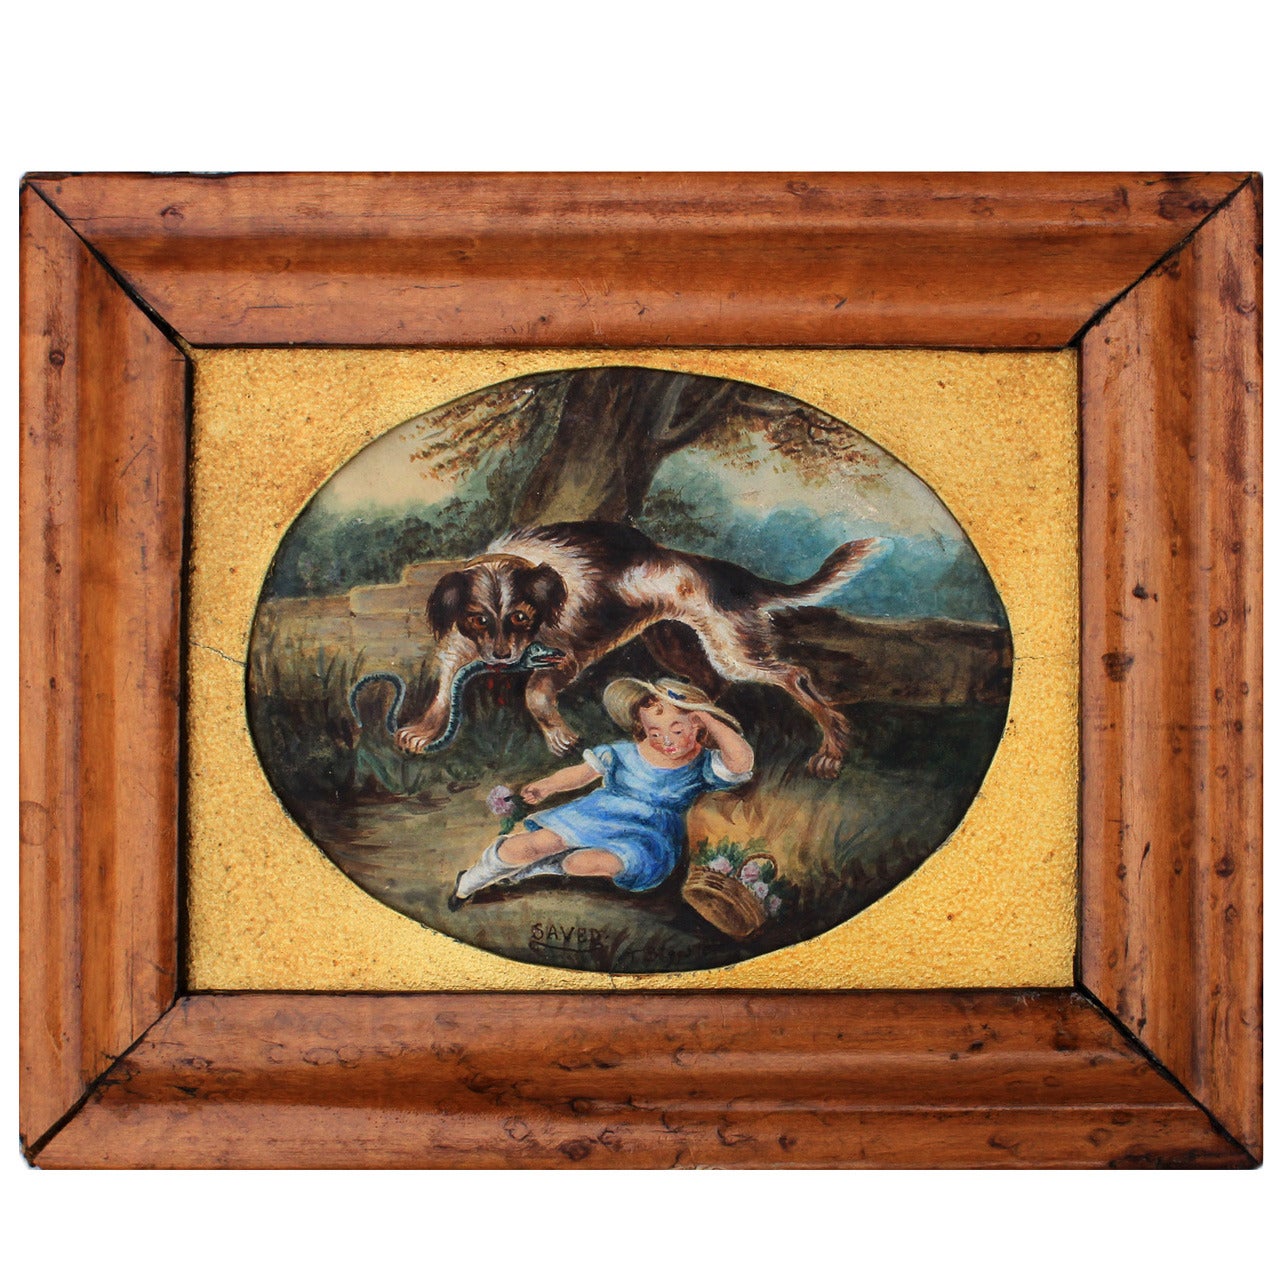 Miniature English Watercolor "SAVED" by T. Biggs 1856 For Sale